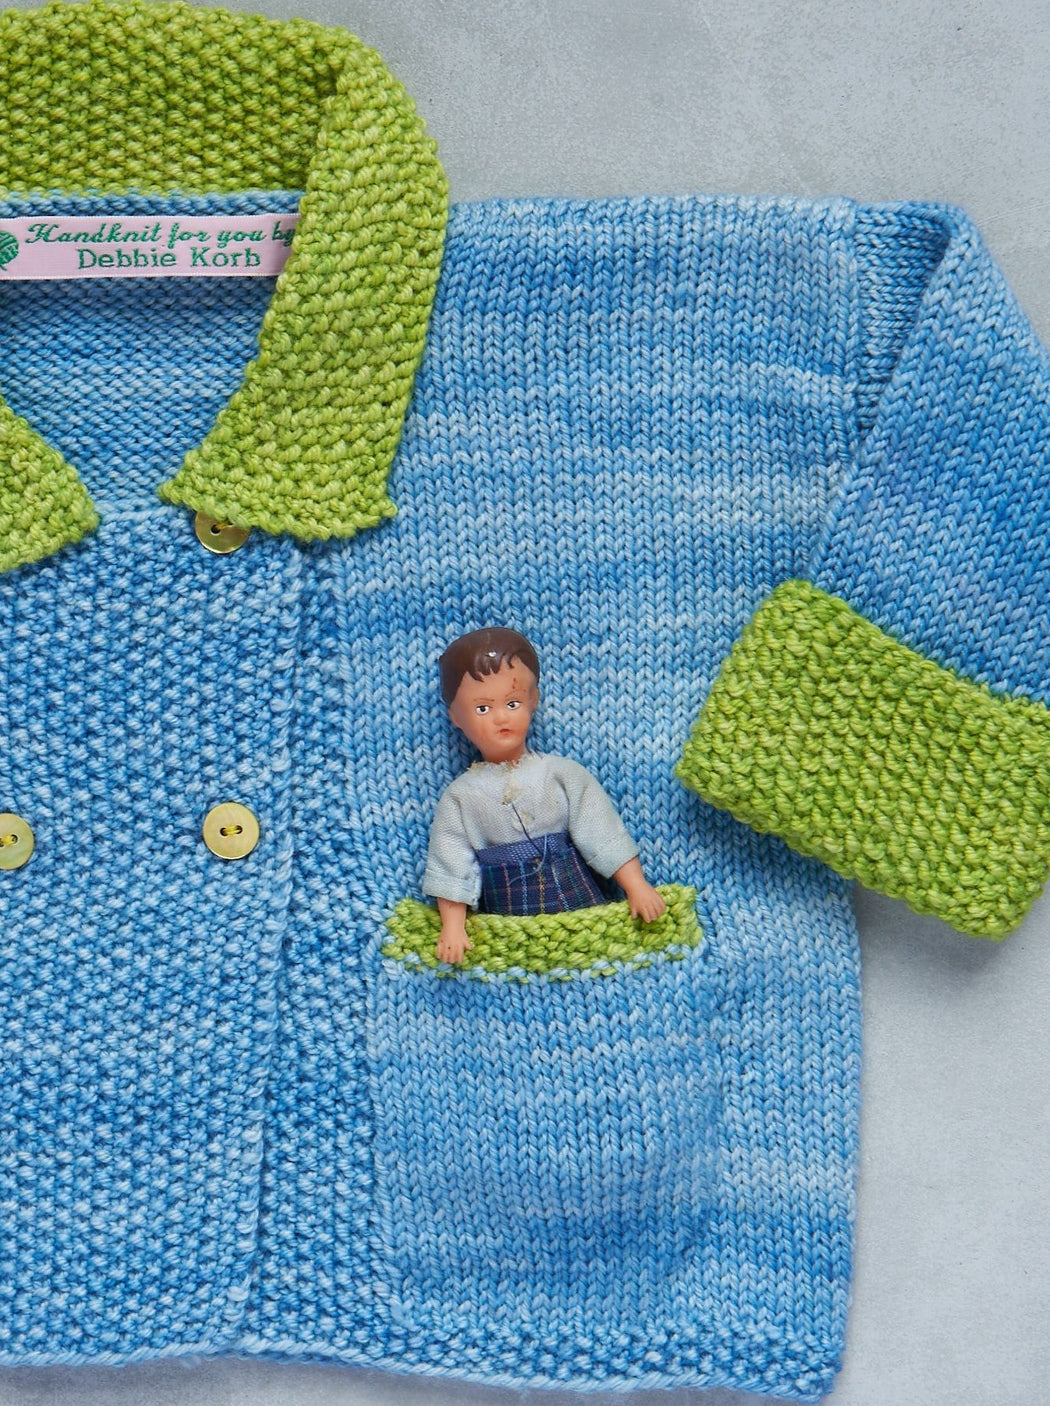 Aunt Debbie's Hand-Knit Baby Sweater (1 - 2 years)